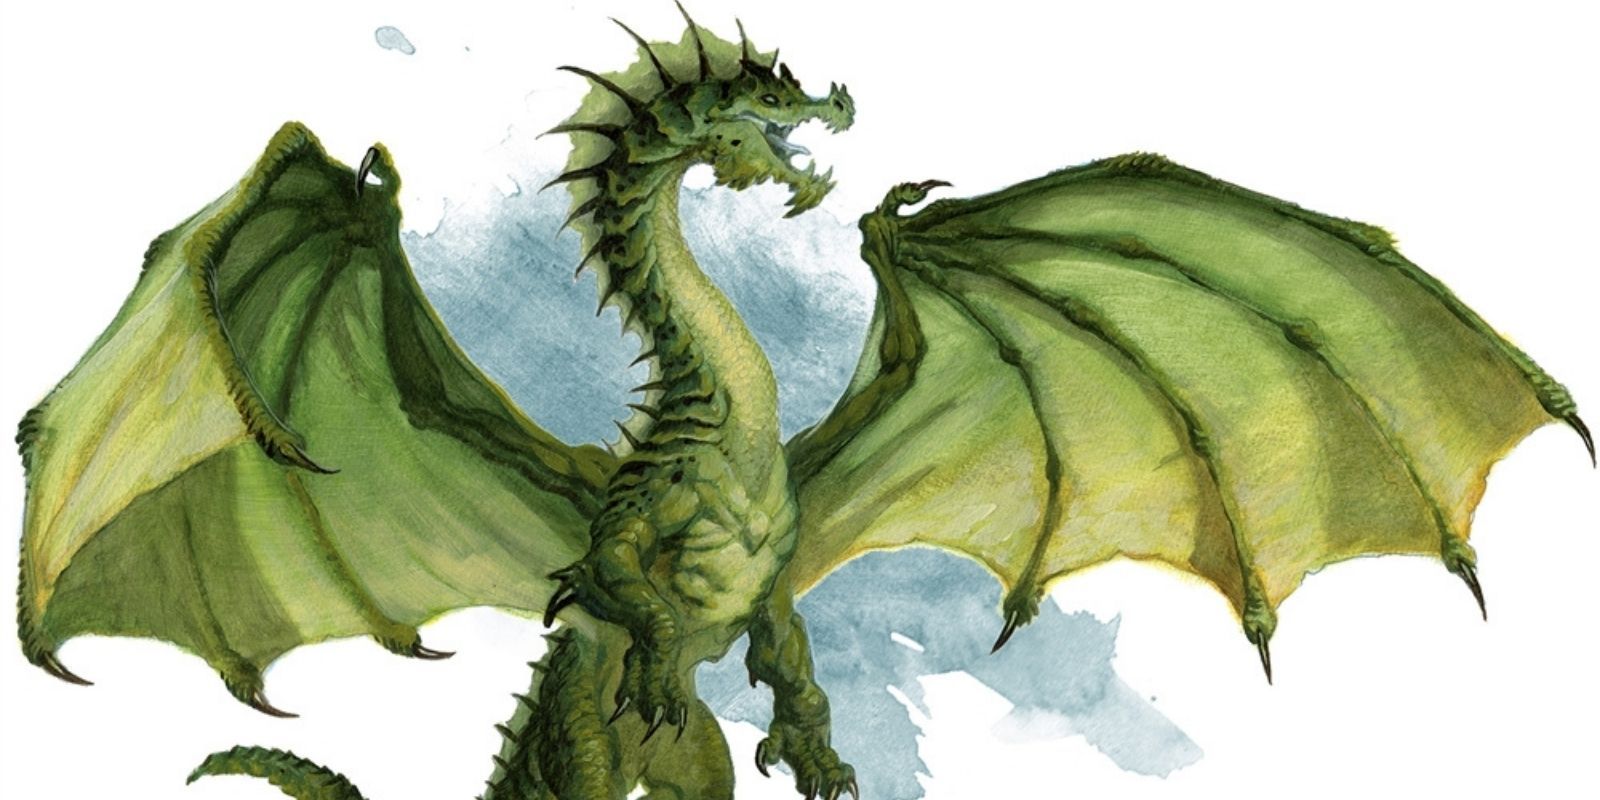 An Emerald Dragon rearing back in DnD